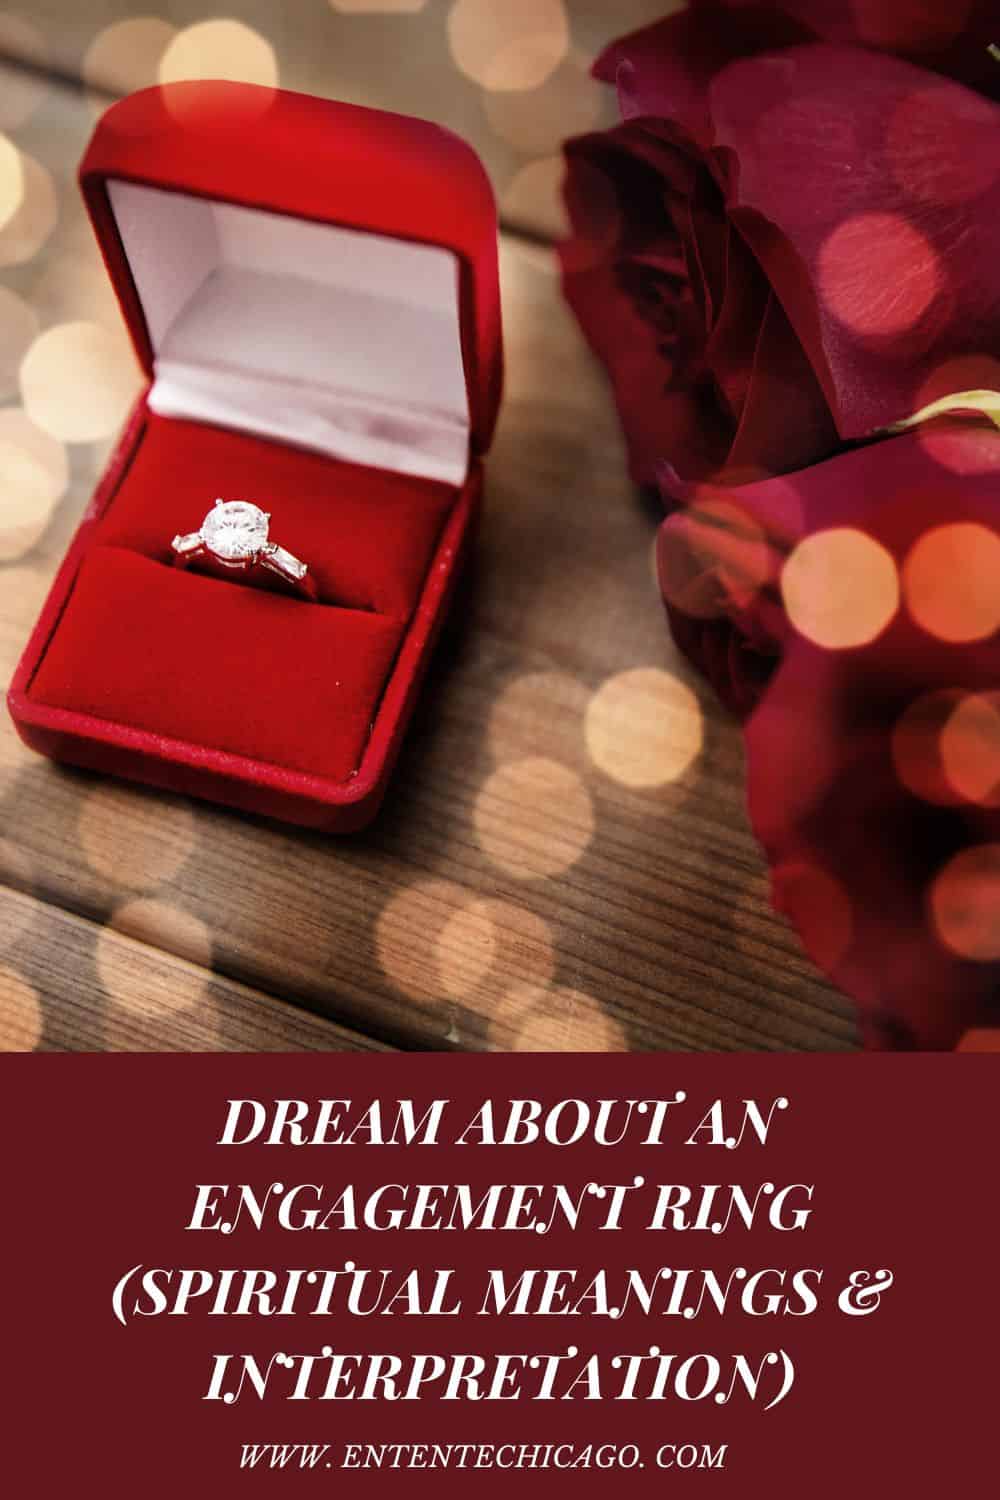 Dream About An Engagement Ring (Spiritual Meanings & Interpretation)